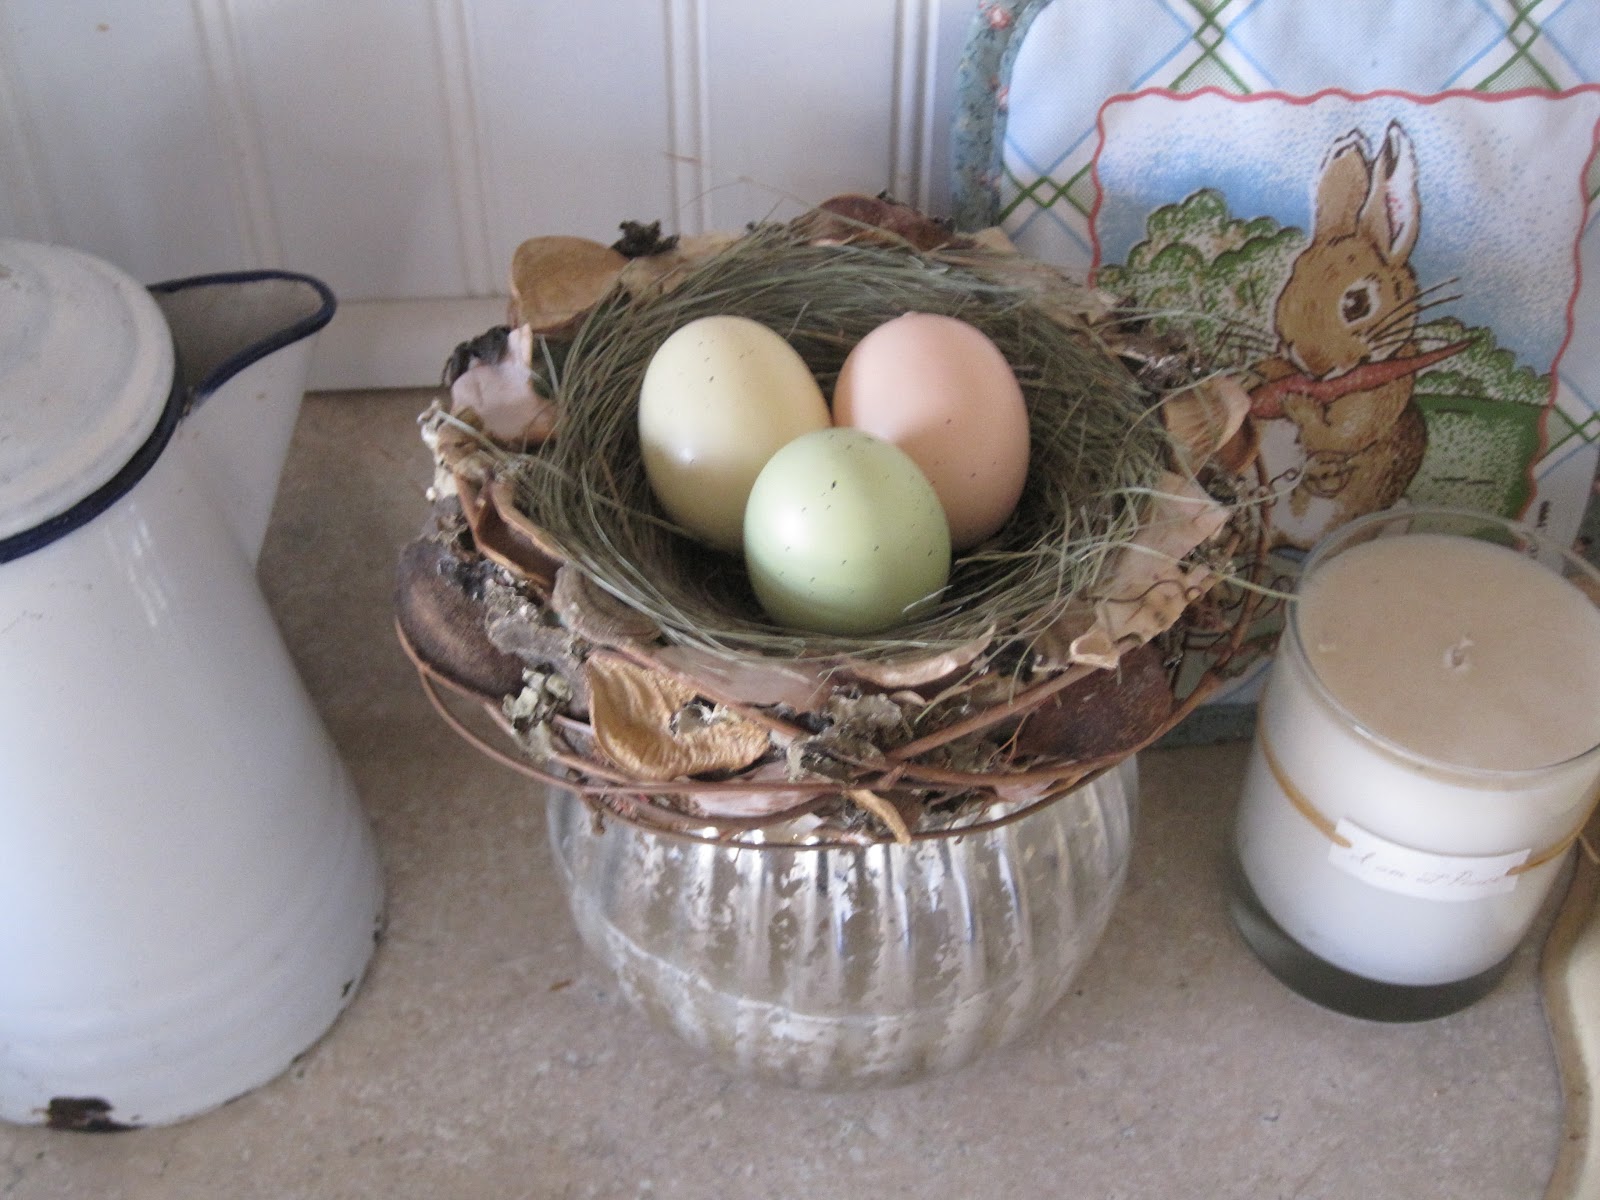 This is the $1.99 nest from Home Goods. The little bunny pot-holder is ...